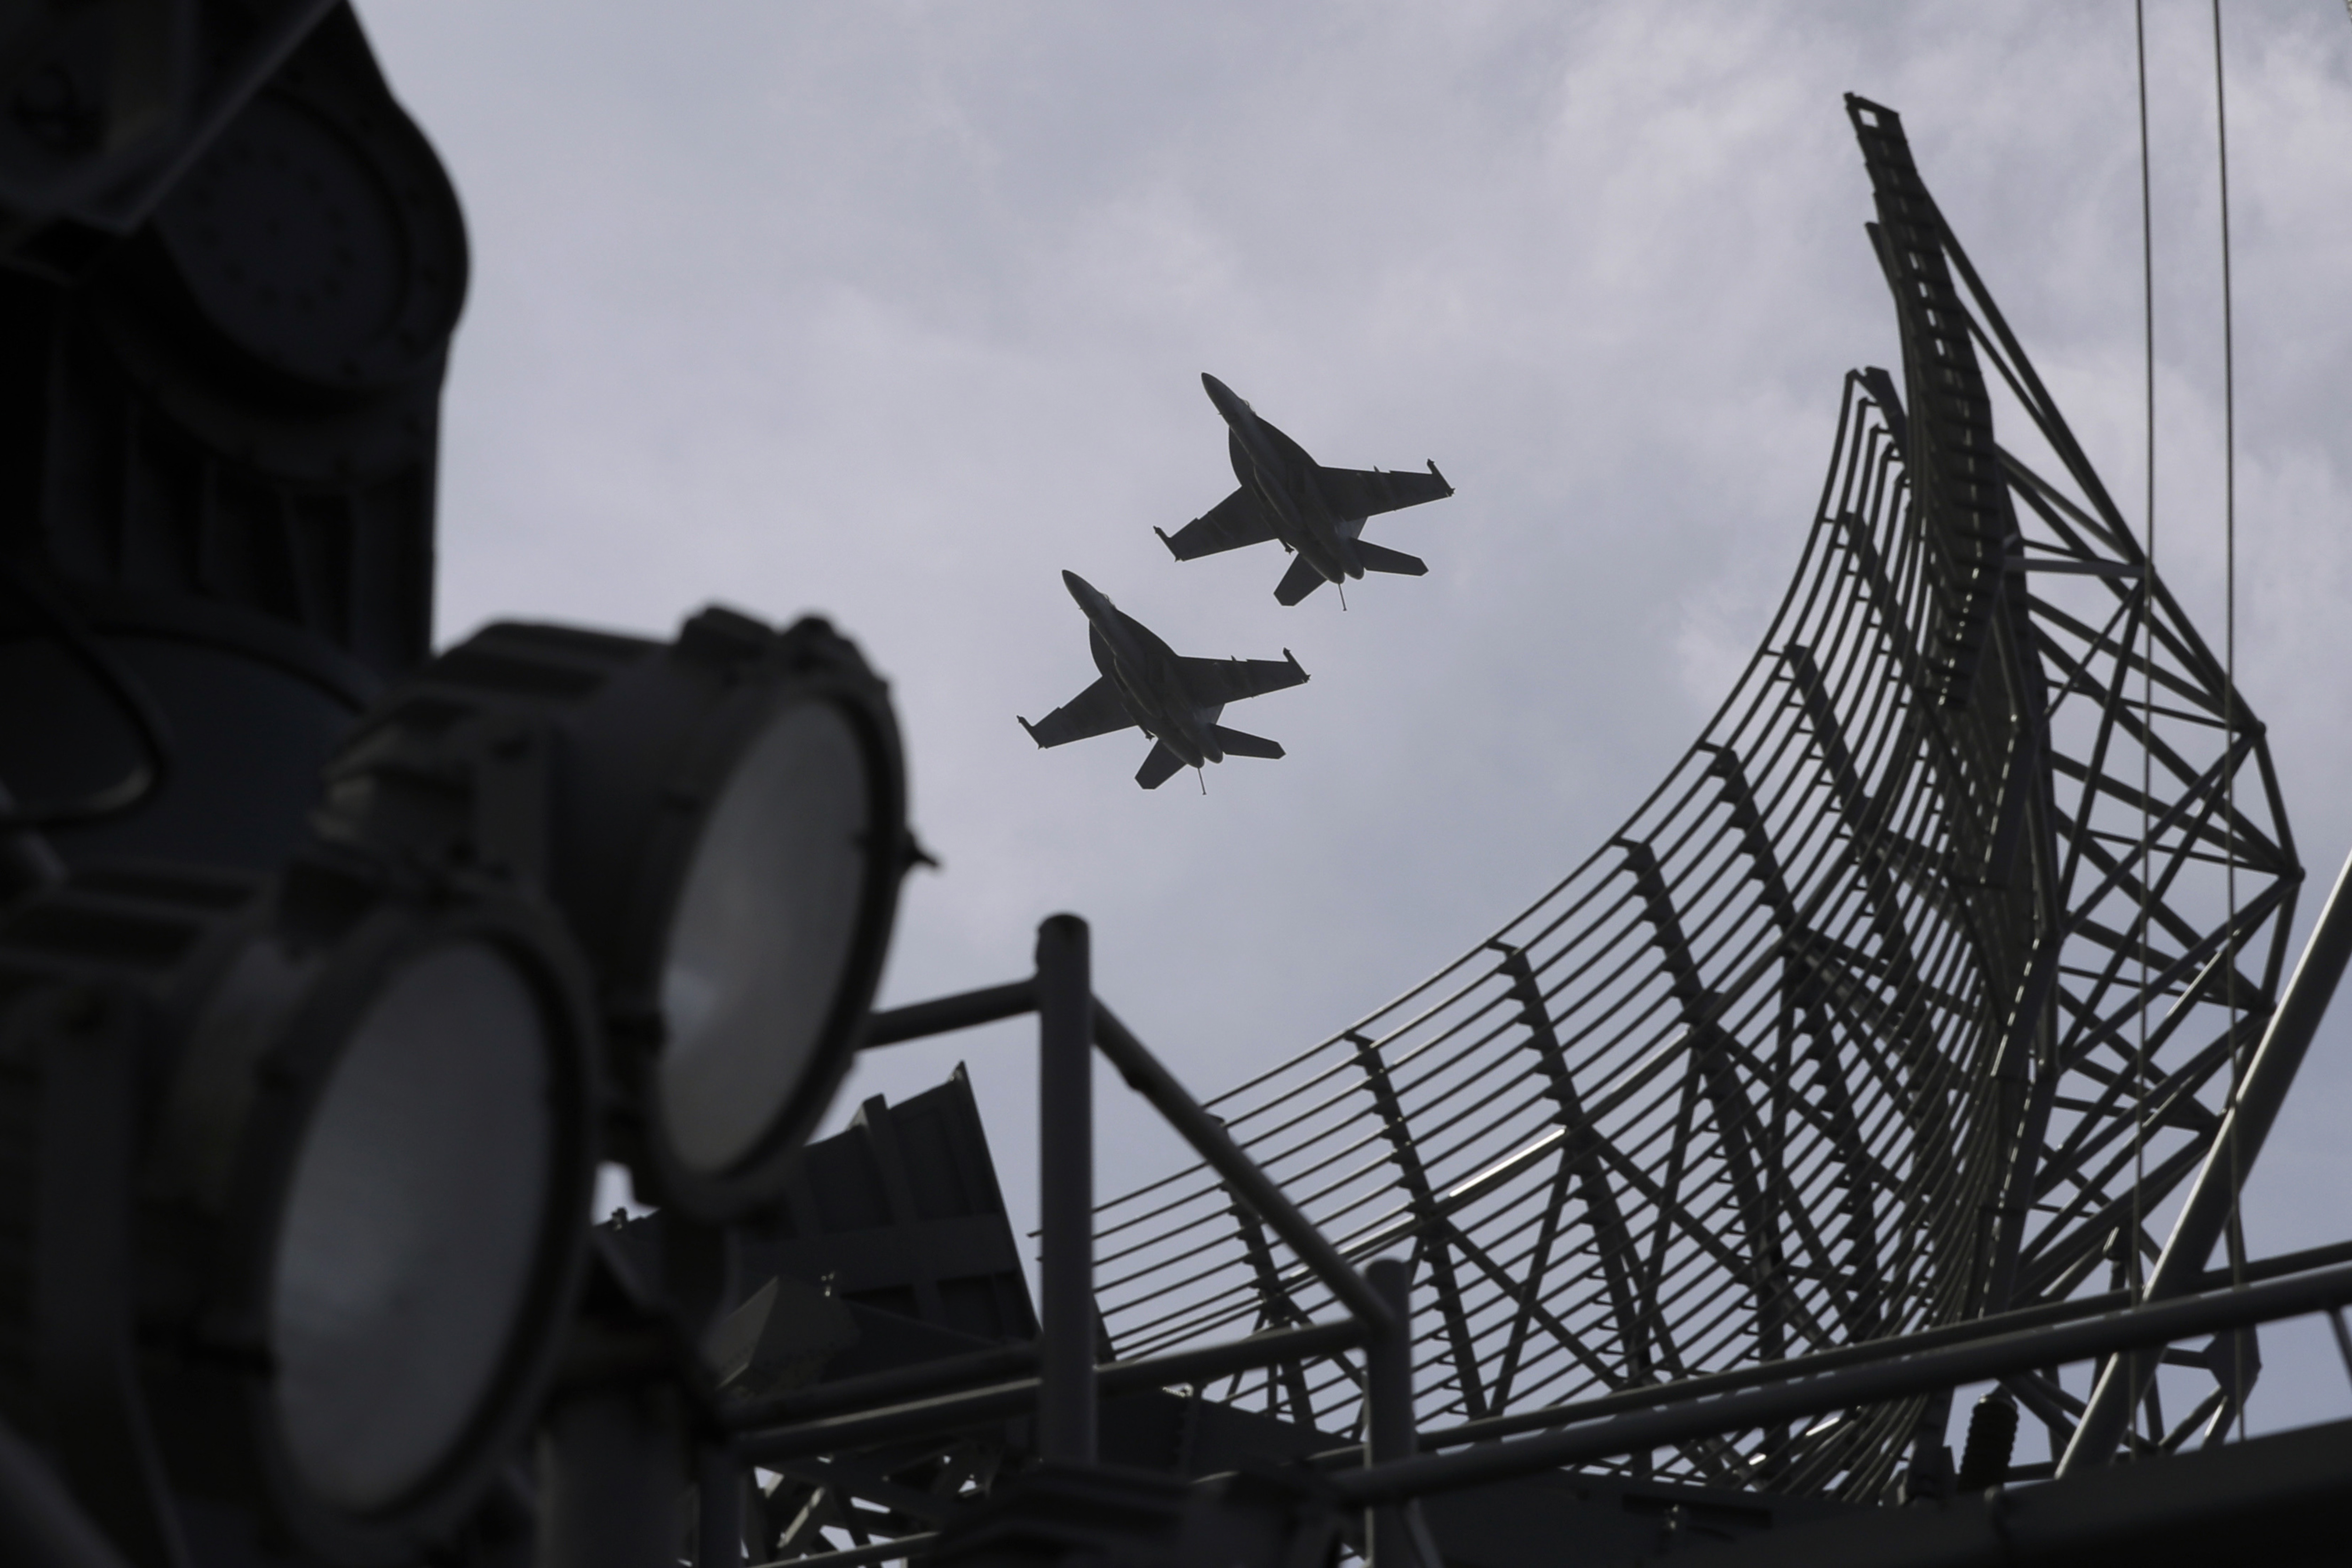 Two F/A-18 Super Hornet fighter jets fly over the U.S. Navy USS Ronald Reagan in the South China Sea, Tuesday, Nov. 20, 2018. China is allowing USS Reagan and its battle group to make a port call in Hong Kong after it earlier turned down a similar request amid tensions with Washington. (AP Photo/Kin Cheung)